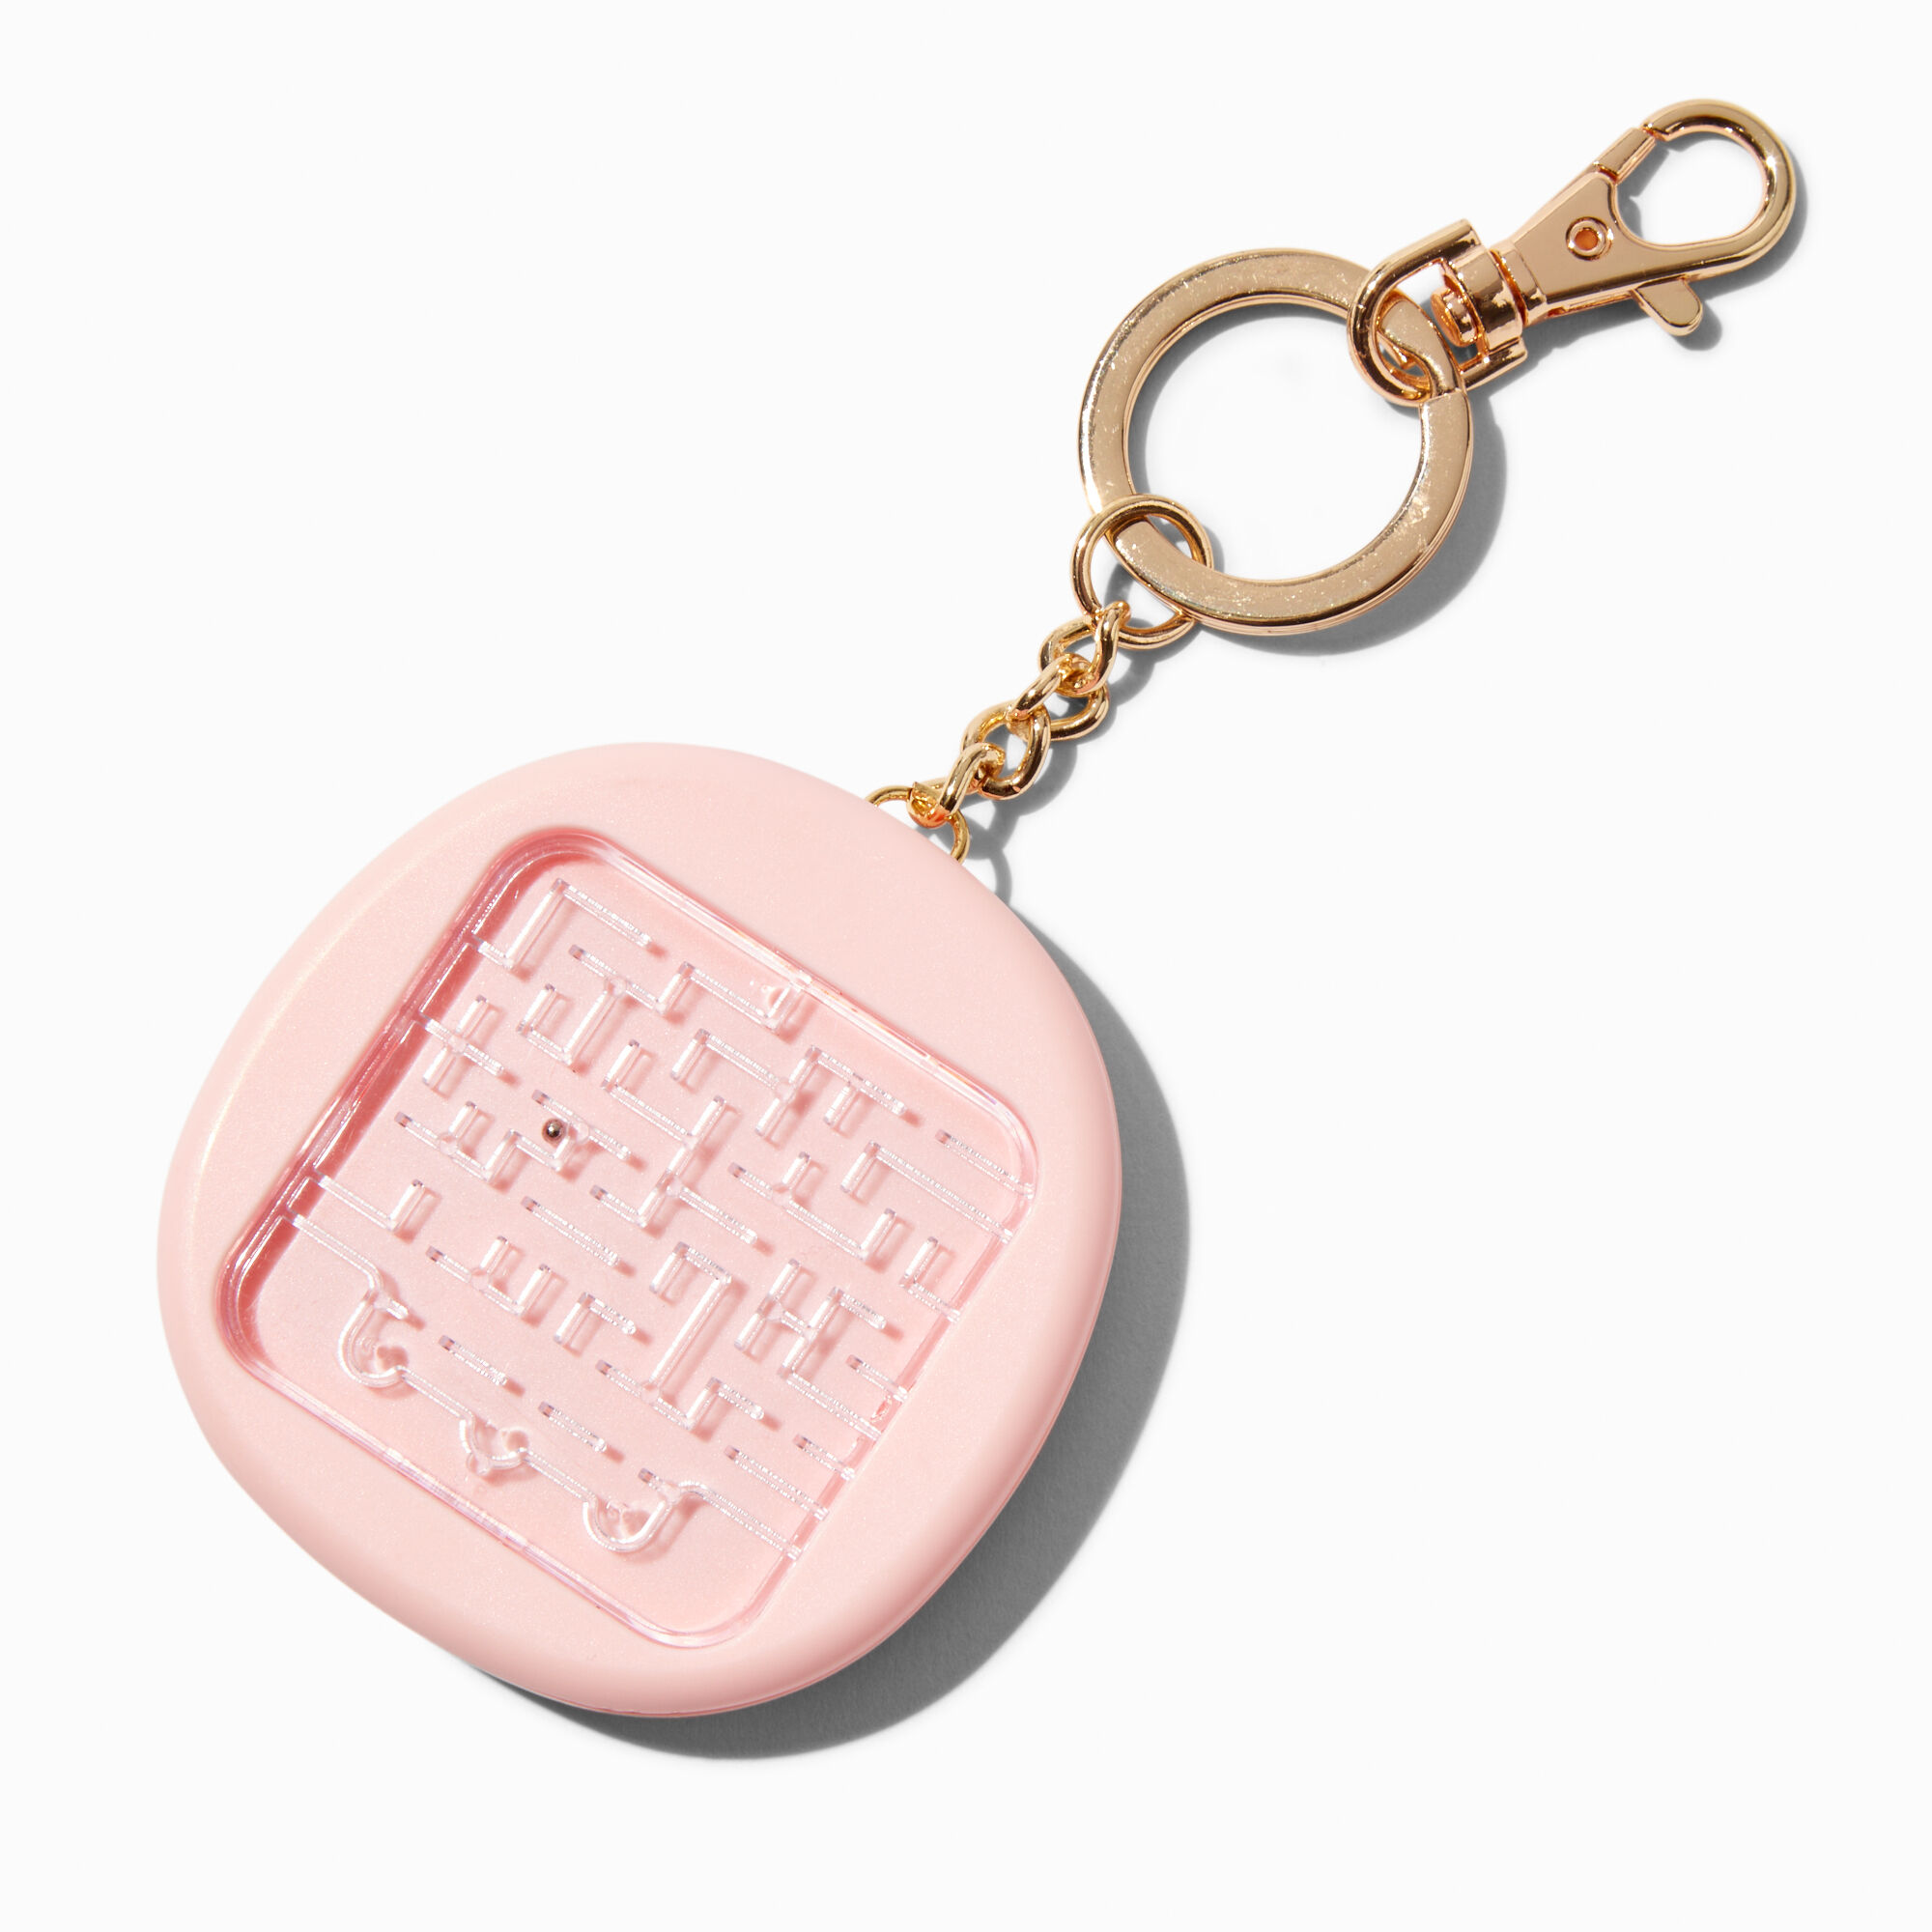 View Claires Maze Game Keyring Pink information